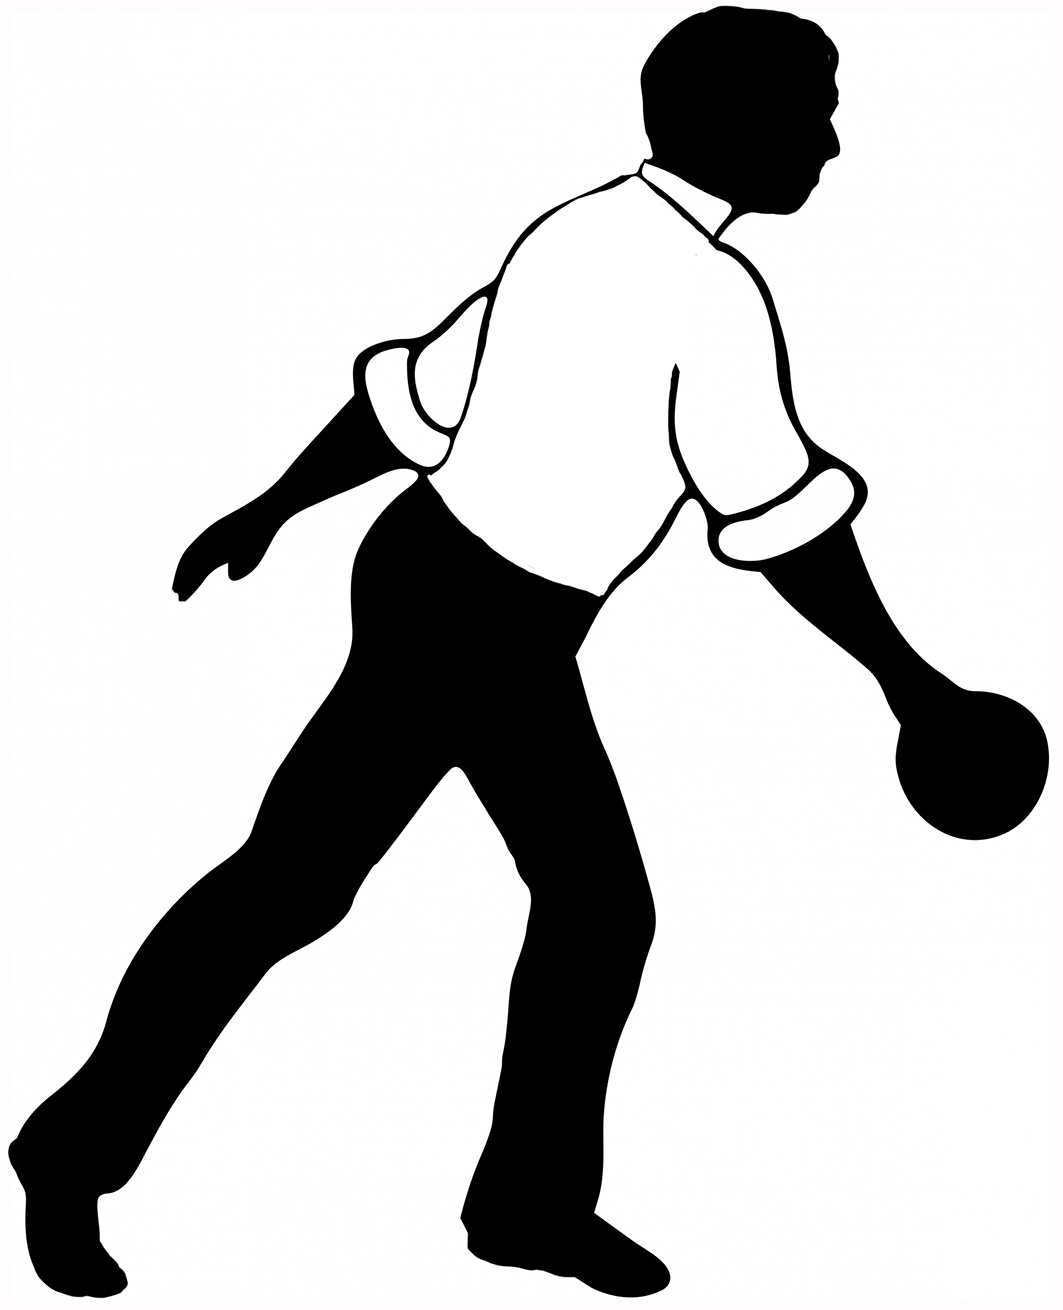 Person bowling clipart